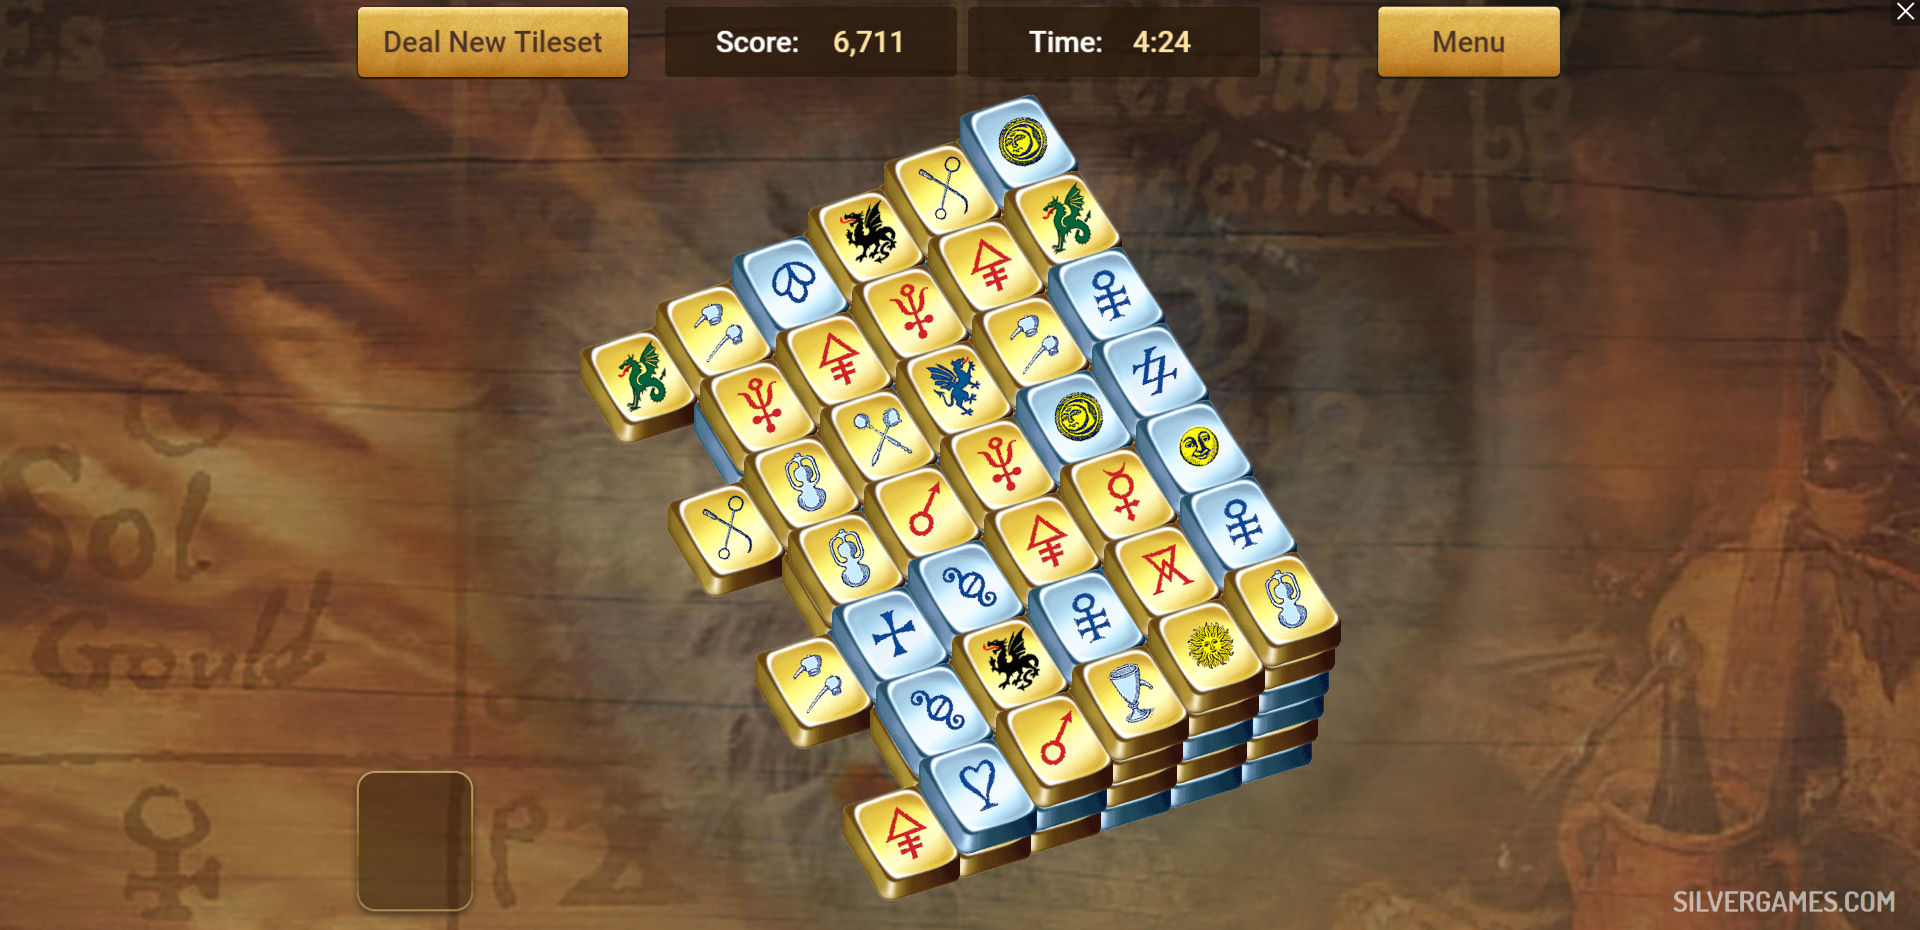 Mahjong Titans Scoring & Tile Values - How To Get High Scores